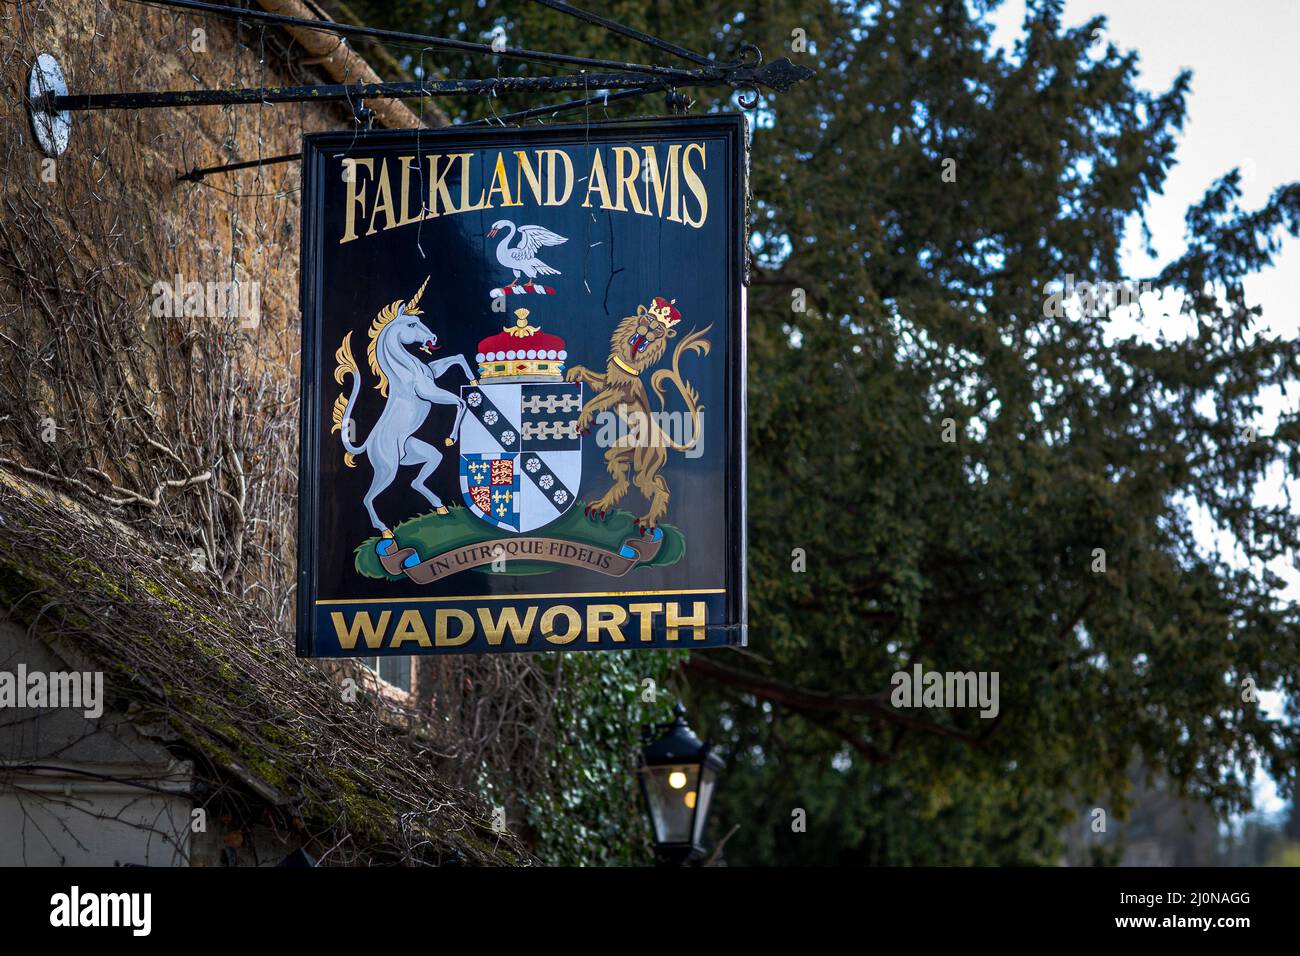 The Falkland Arms pub in the Cotswold village of Great Tew, Oxfordshire, England, UK Stock Photo